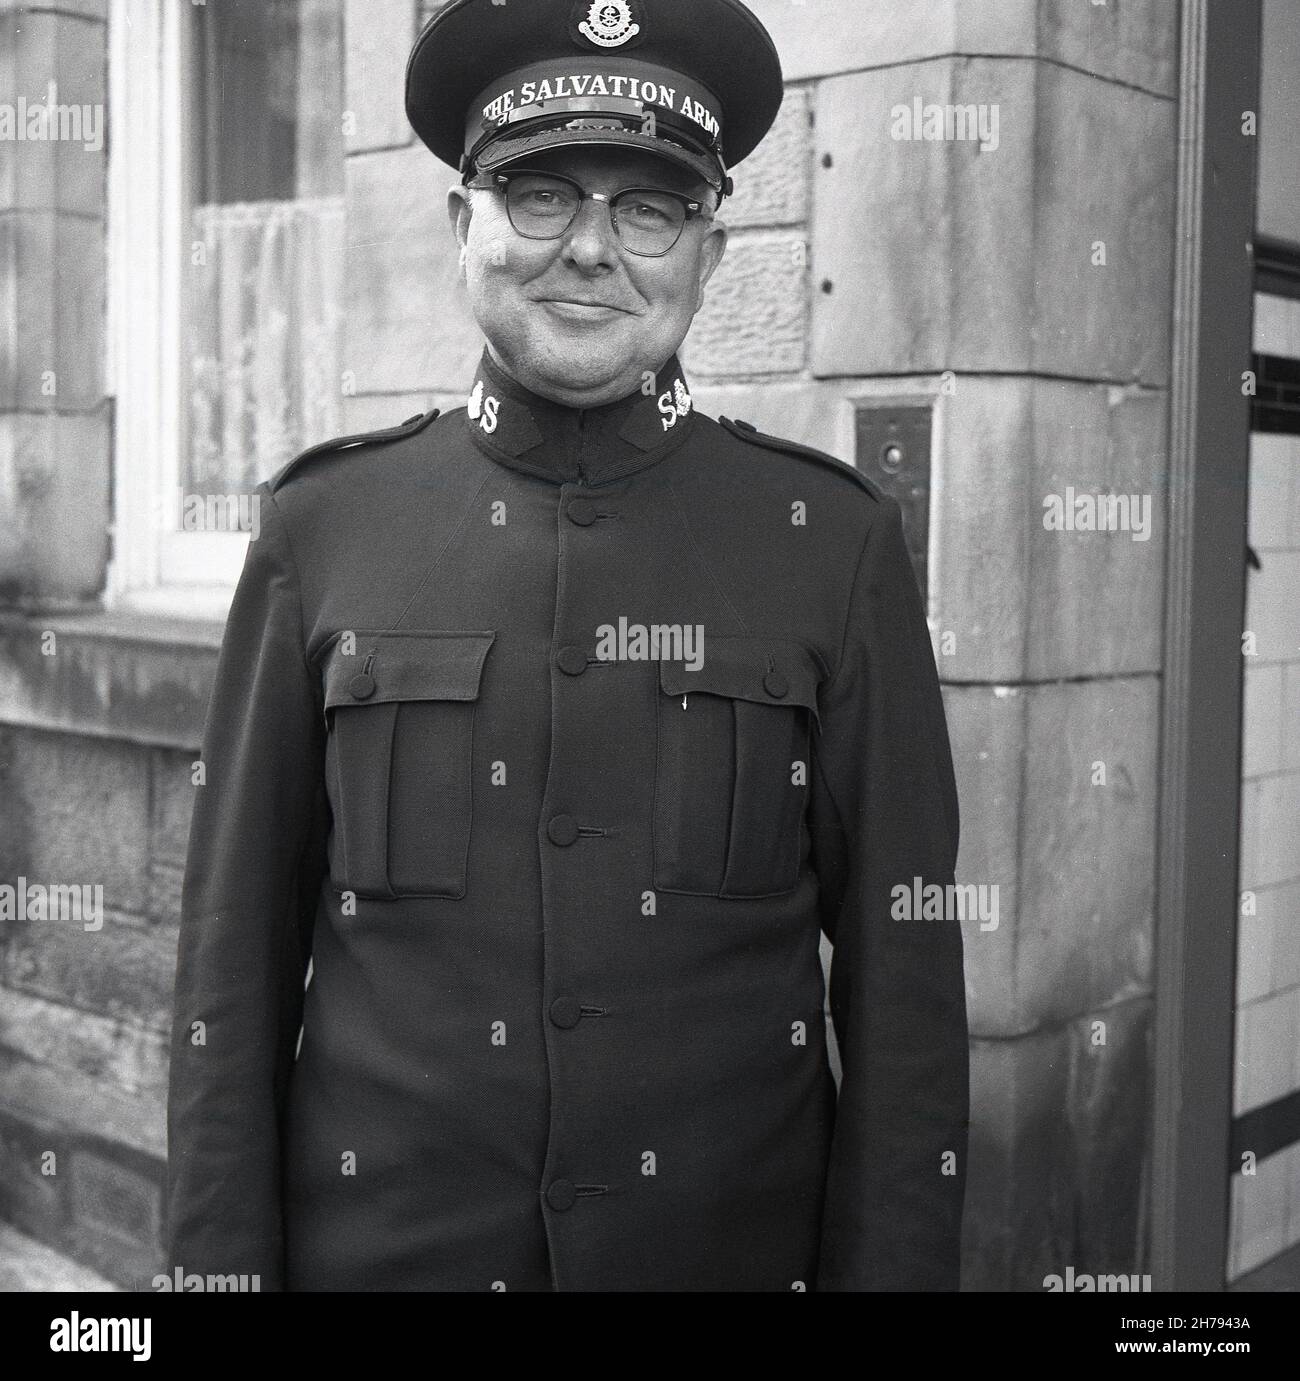 1965, historical, outside a building, a soldier of The Salvation Army in his uniform and hat standing for his photo, Fife Scotland, UK. Soldiers of The Salvation Army are Christians who have undertaken a specific convenant or promise regarding lifestyle and beliefs and wear the uniform as a visible sign of their faith. Officers, Soldiers and Adherents are known as Salvationists. Founded in London in 1865 by William Booth and wife, Catherine as a charity to bring 'Salvation' to the poor & destitute, Booth introduced the military structure in 1878, which continued as a matter of tradition. Stock Photo